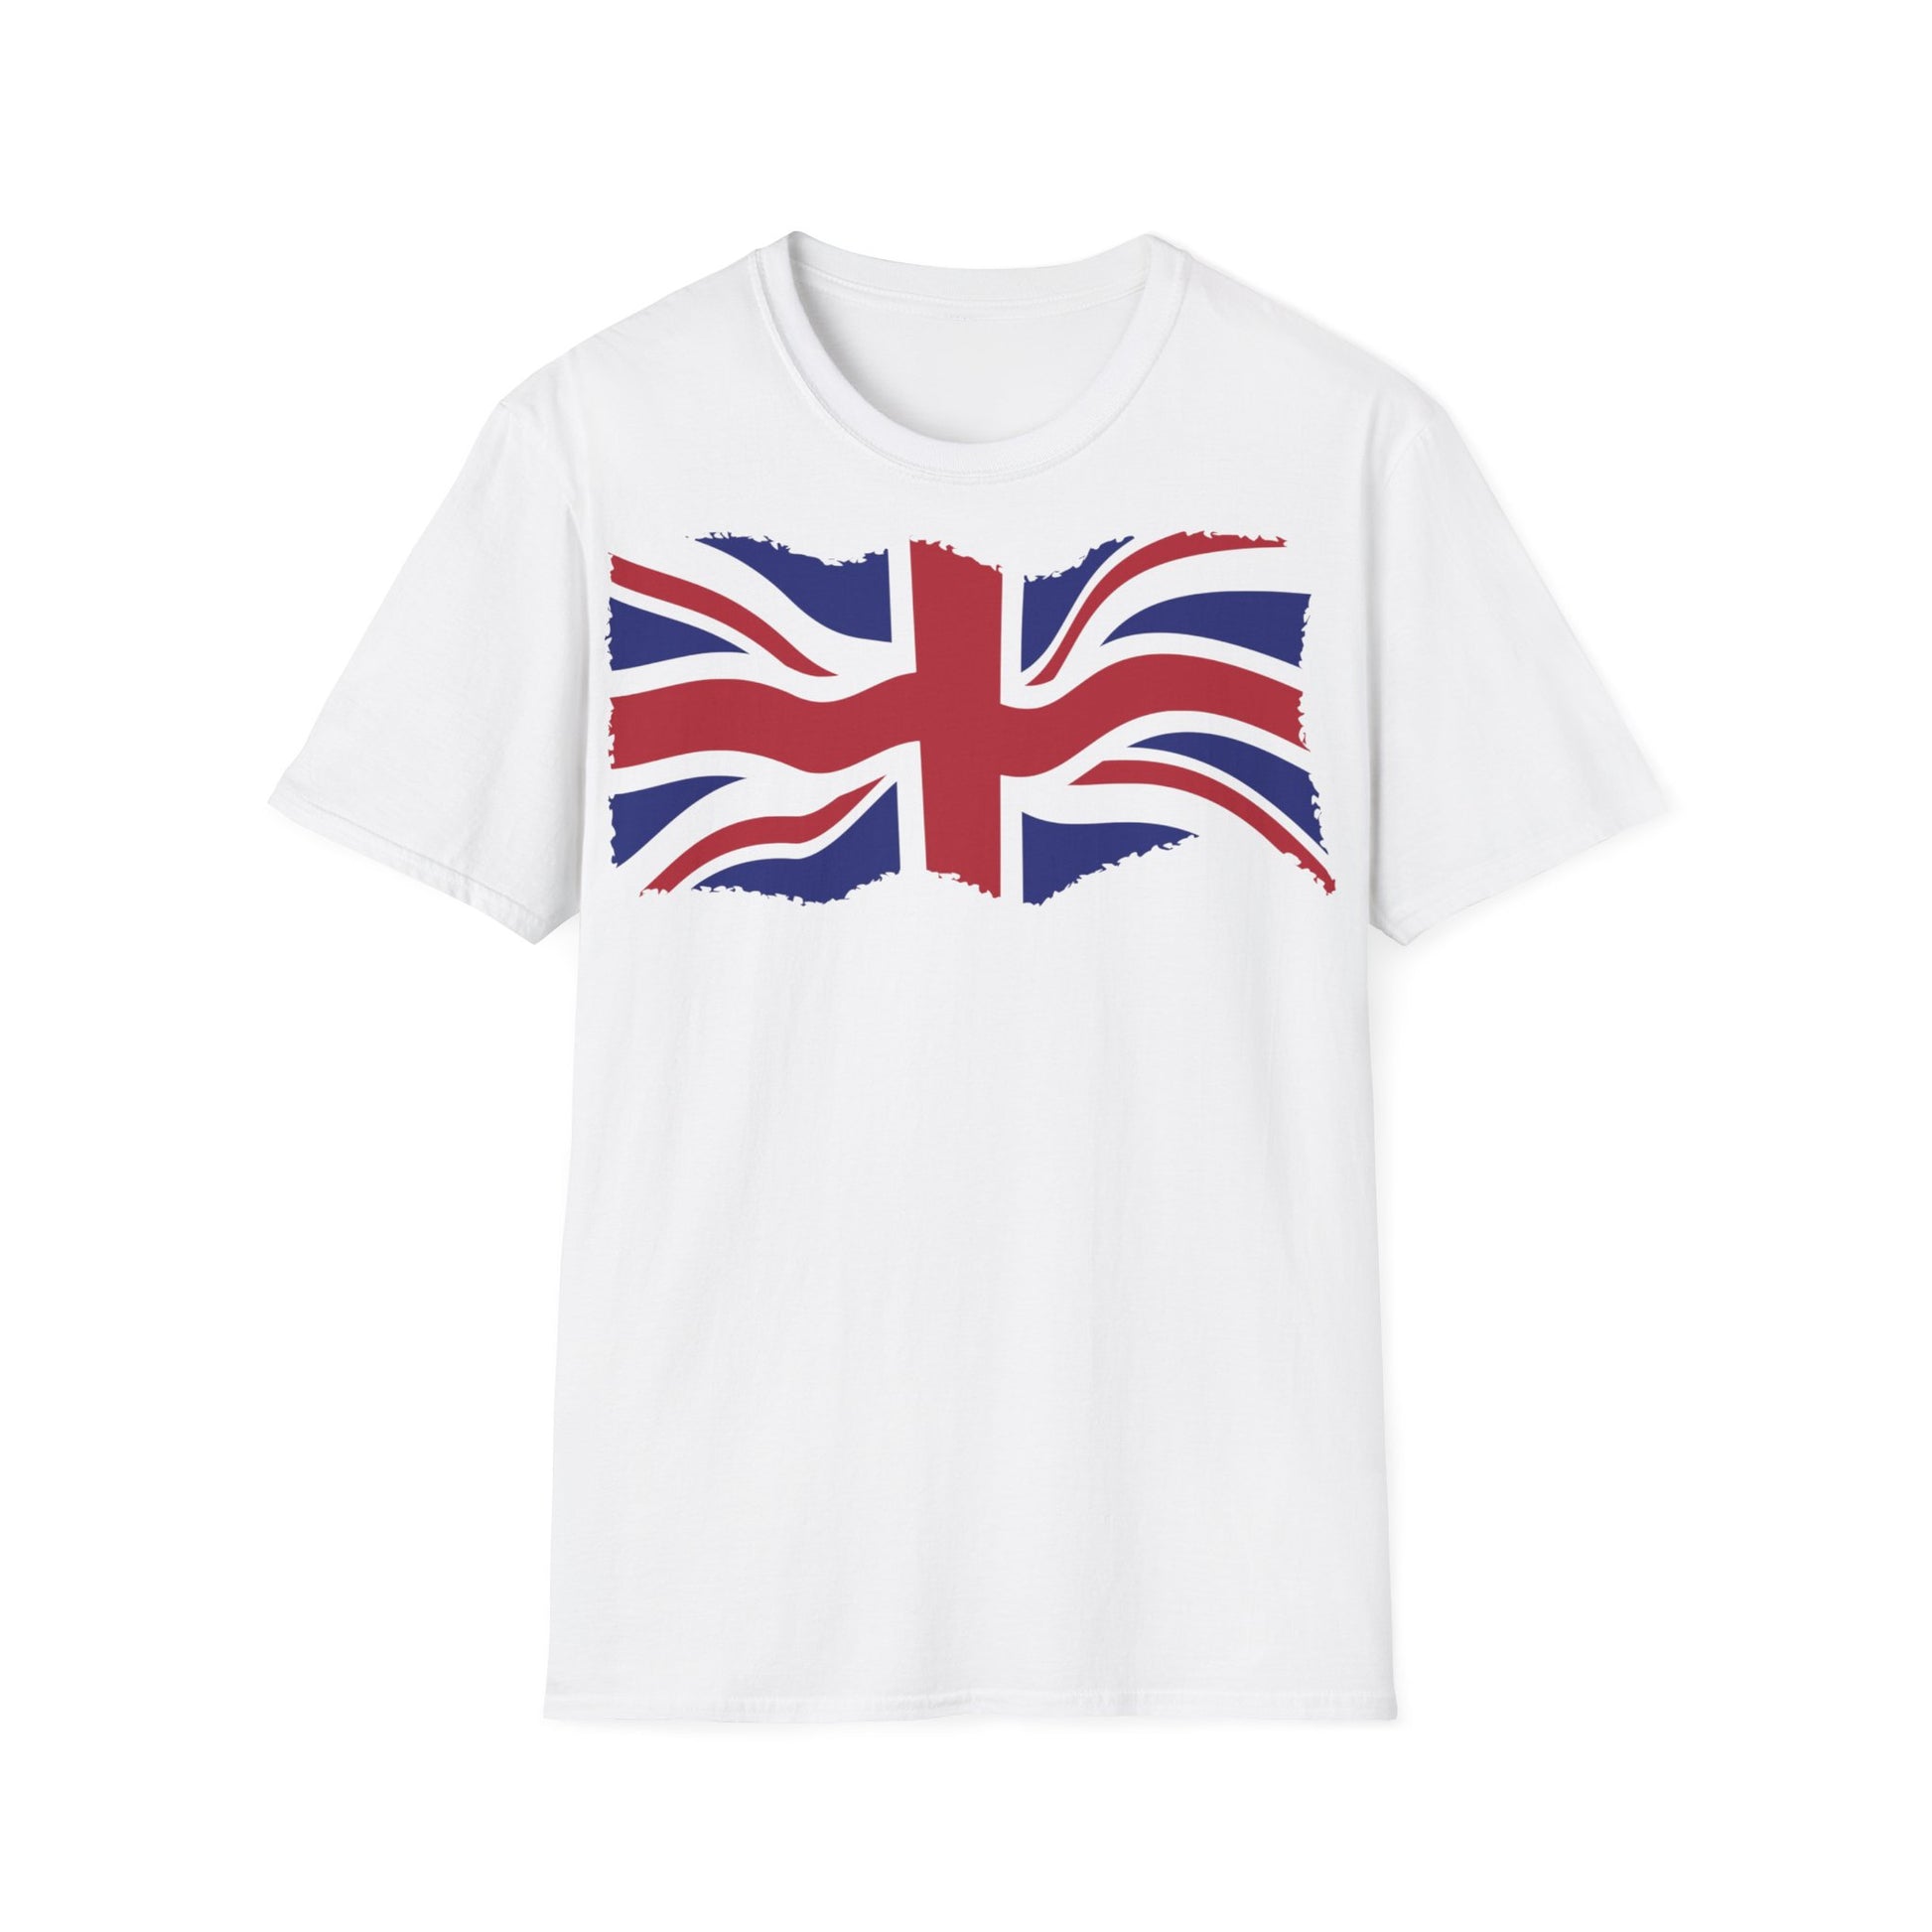 A white t-shirt with a design of a Union Jack flag done in a grunge style